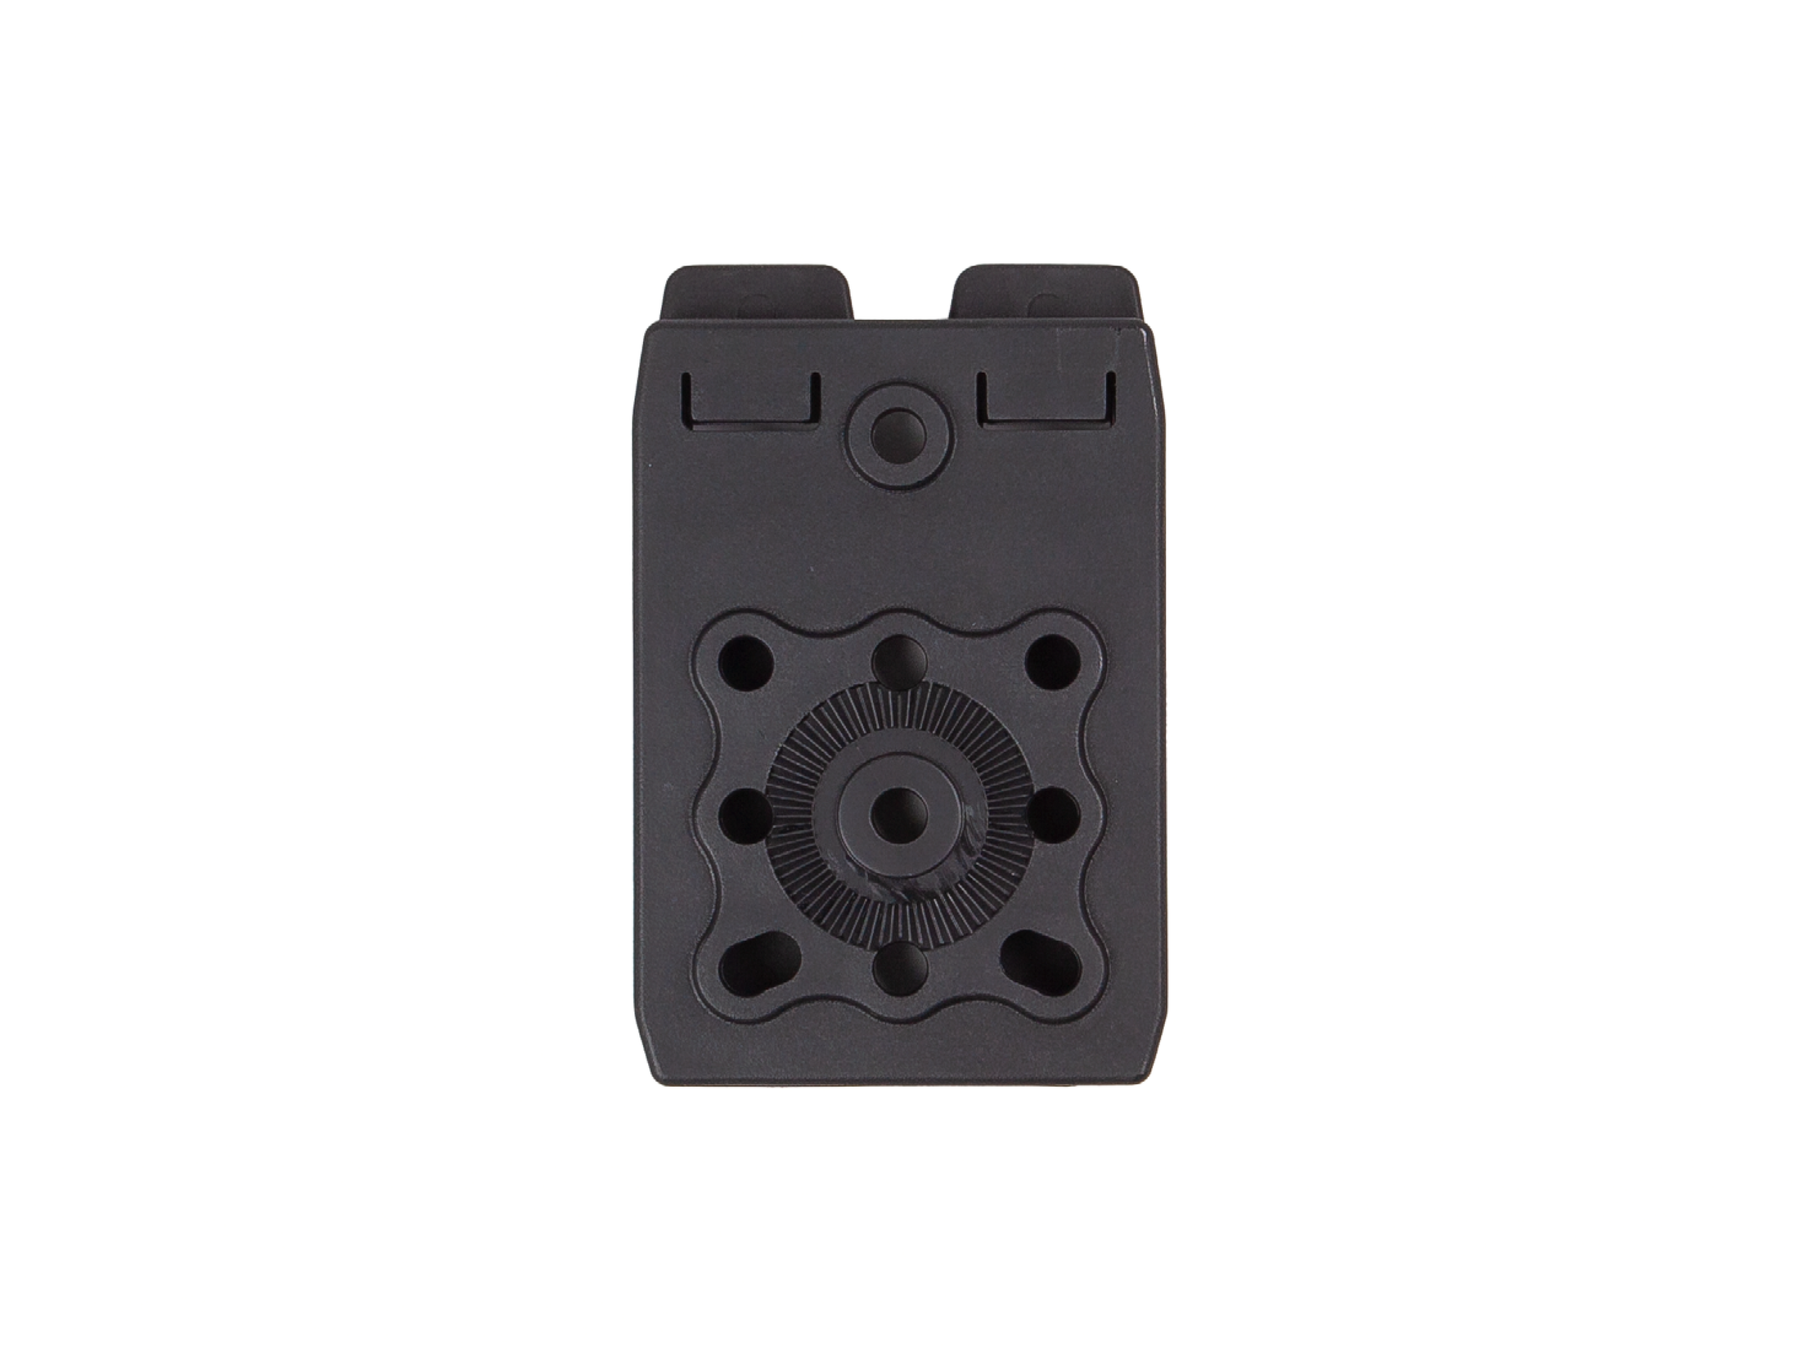 Strike (ASG) Molle Attachment for Q.R. Polymer Holsters